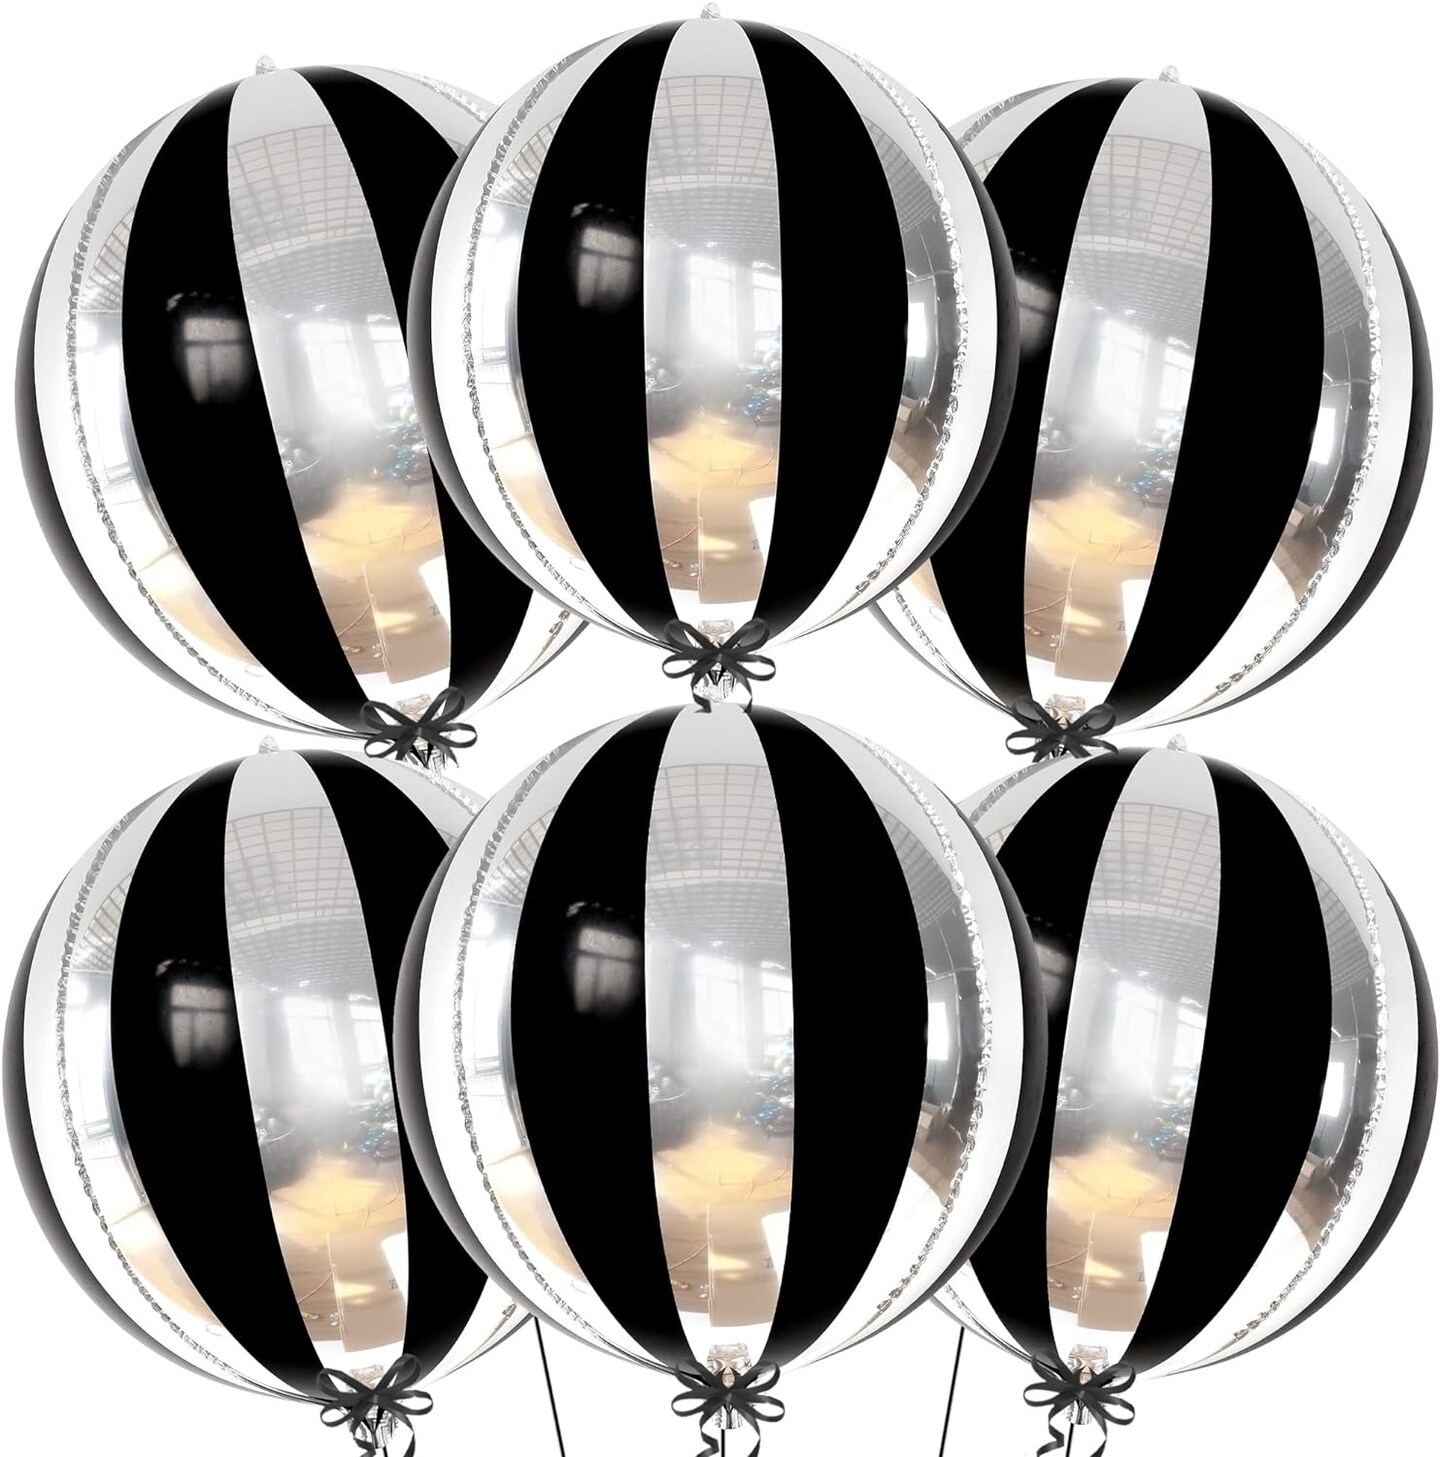 Big, 22 Inch Black and Silver Balloons - Pack of 6, Black and Silver Party Decorations | 360 Degree 4D Stripe Black Silver Balloons | Silver and Black Balloons for Black and White Party Decorations